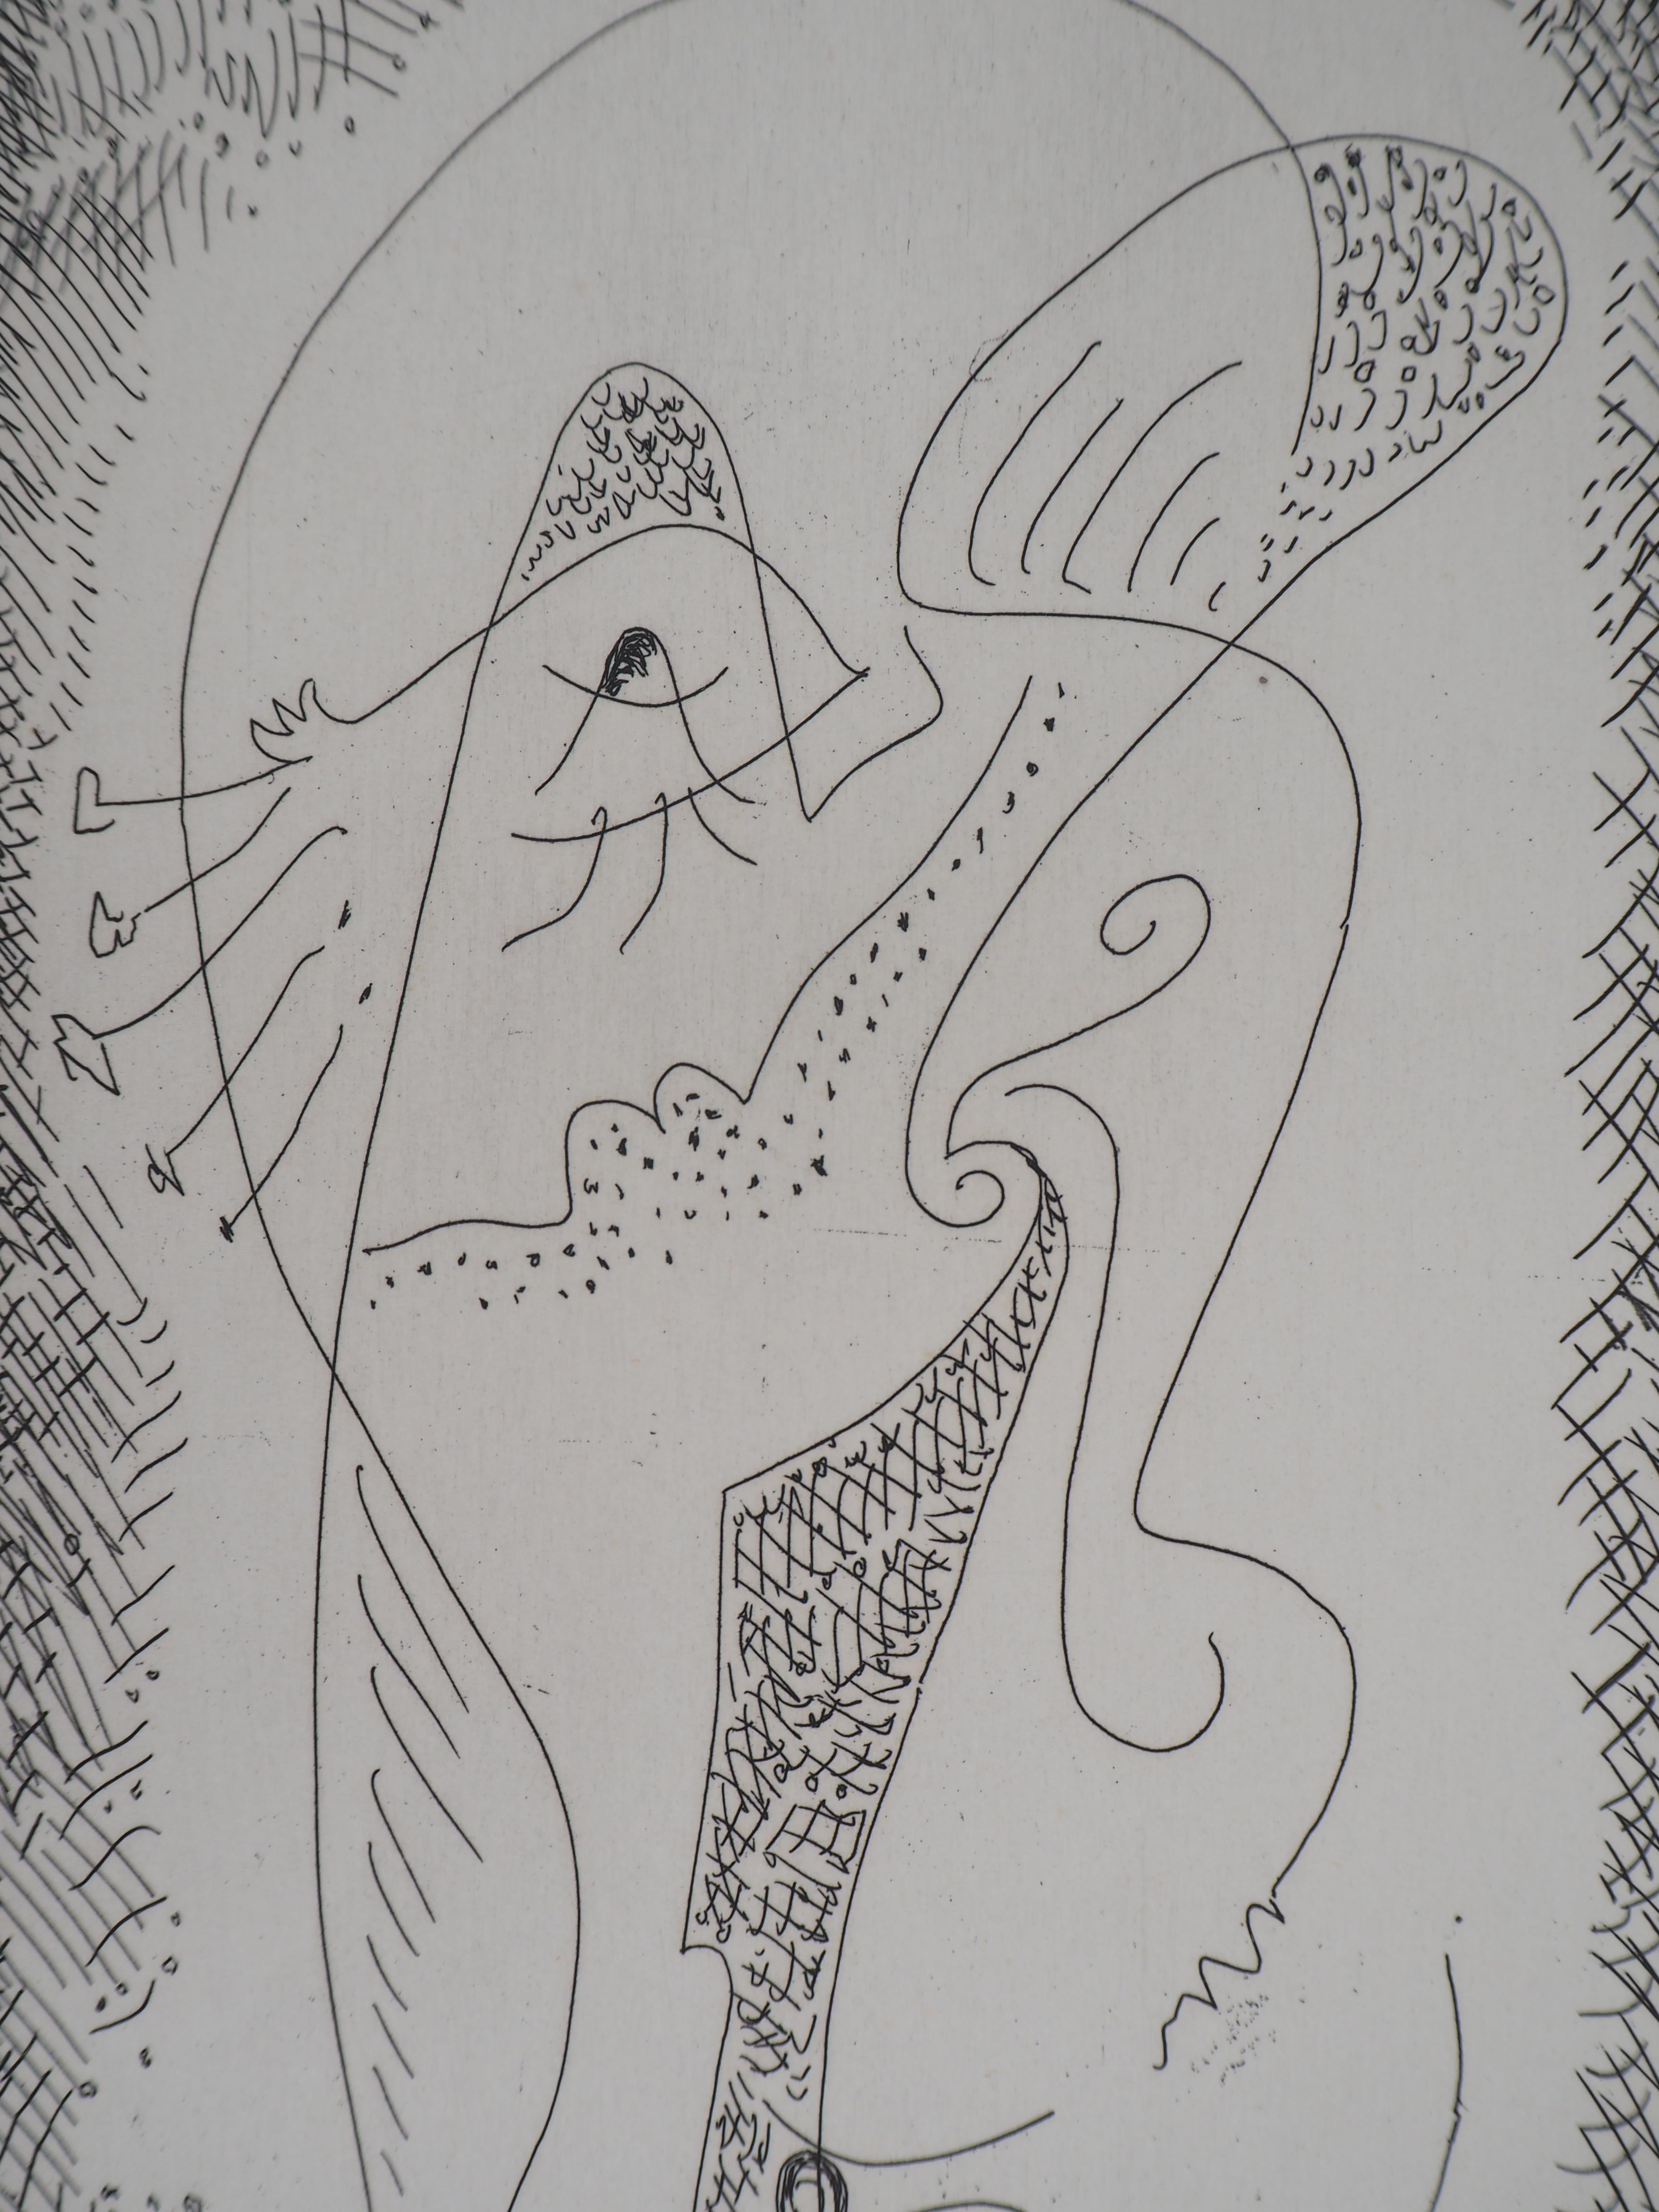 The Surrealist Dream - Original handsigned etching - Ltd /50 - Gray Figurative Print by André Masson